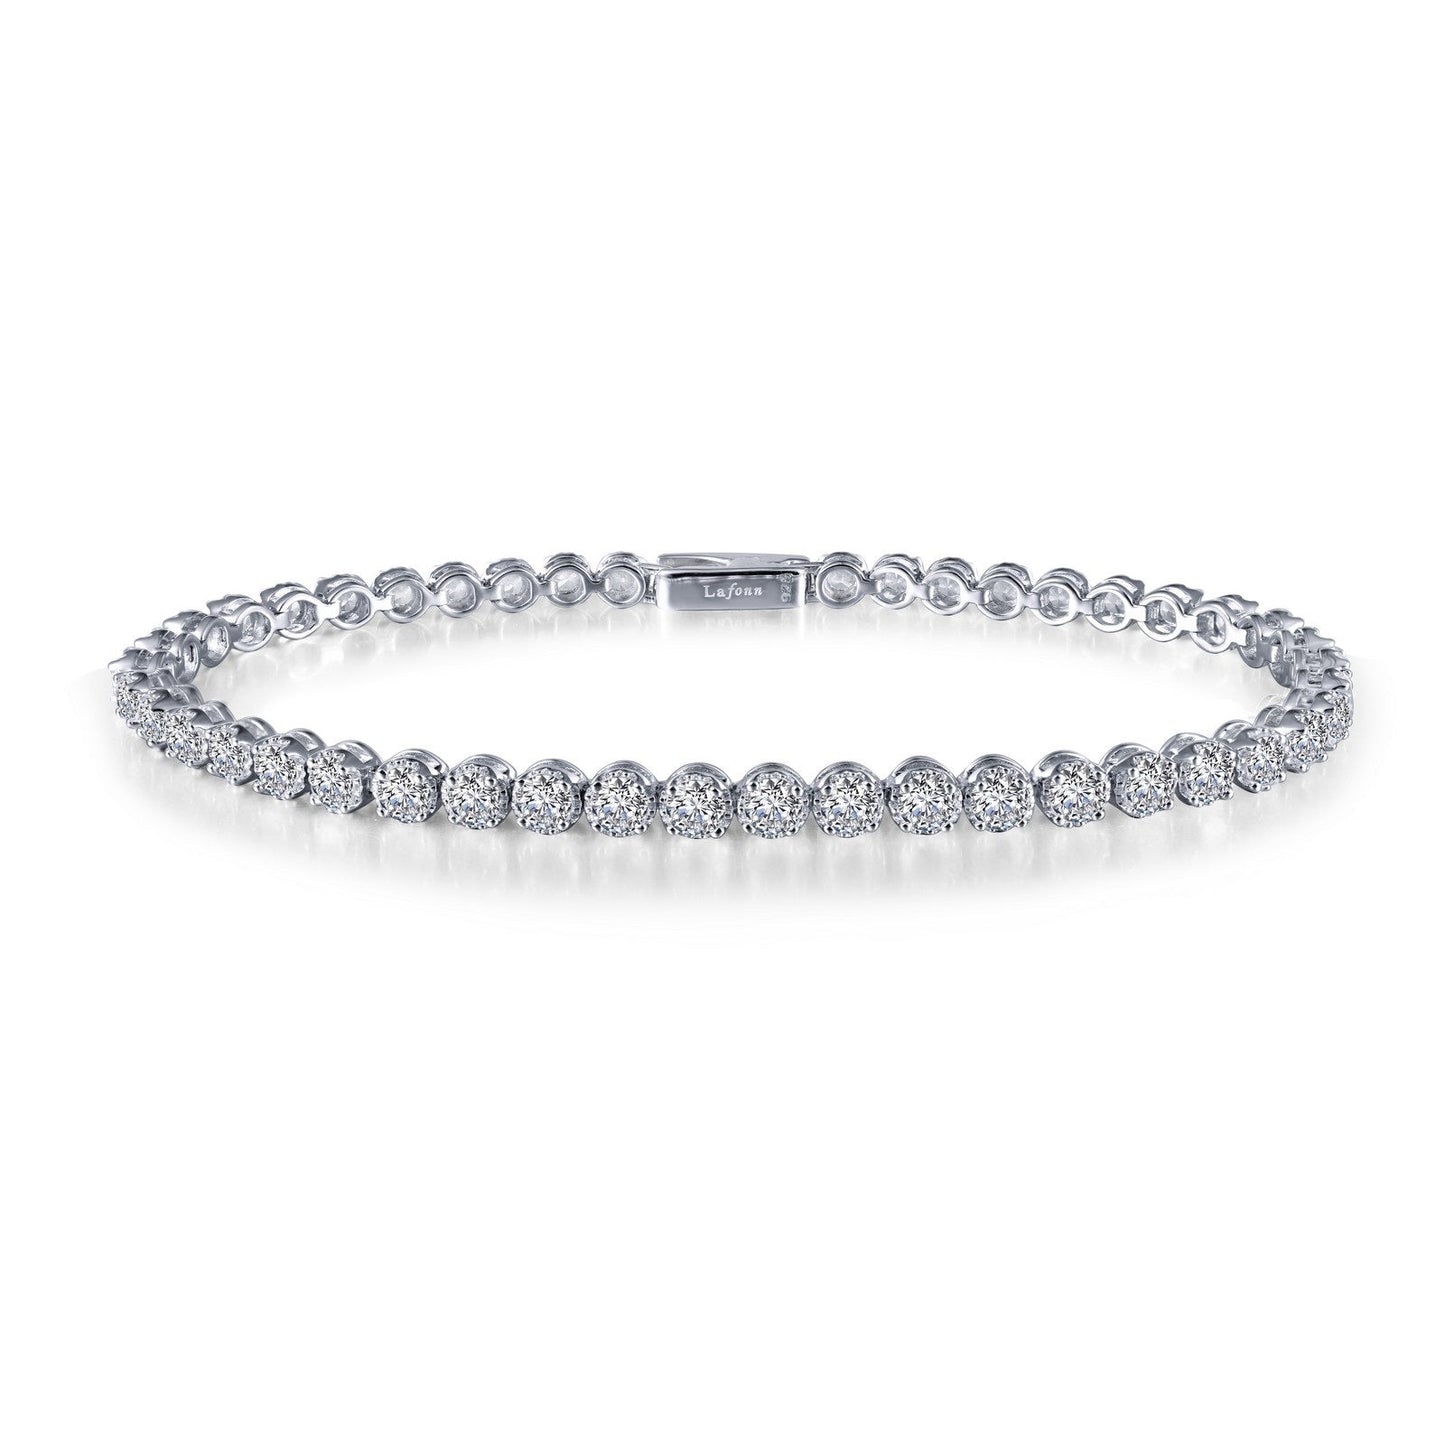 Load image into Gallery viewer, Lafonn Classic Tennis Bracelet 44 Stone Count B0034CLP72
